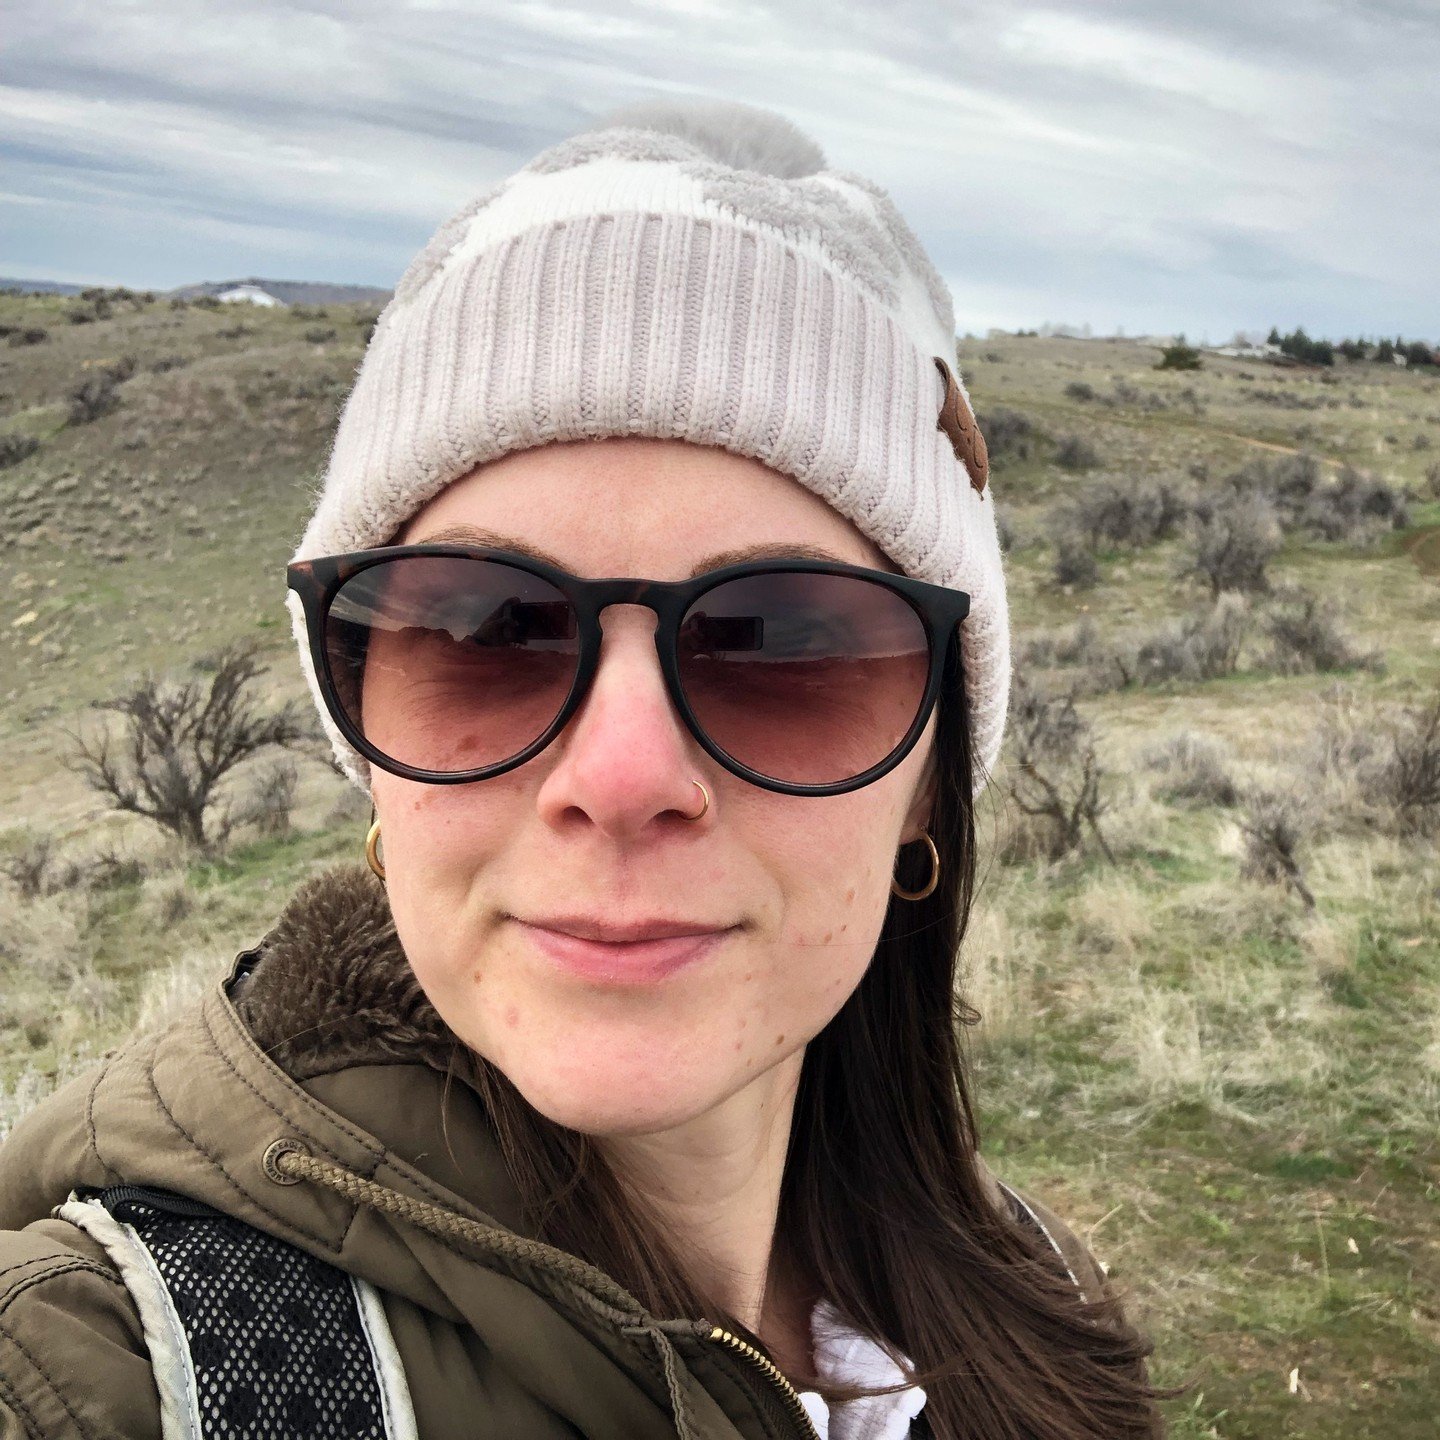 The last time I was on this hike, I was visiting Boise last year with someone I thought I&rsquo;d be with forever. 

Honestly, I also wasn&rsquo;t in a very good headspace at the time. But I was really trying to make changes and have faith.

Then, I 